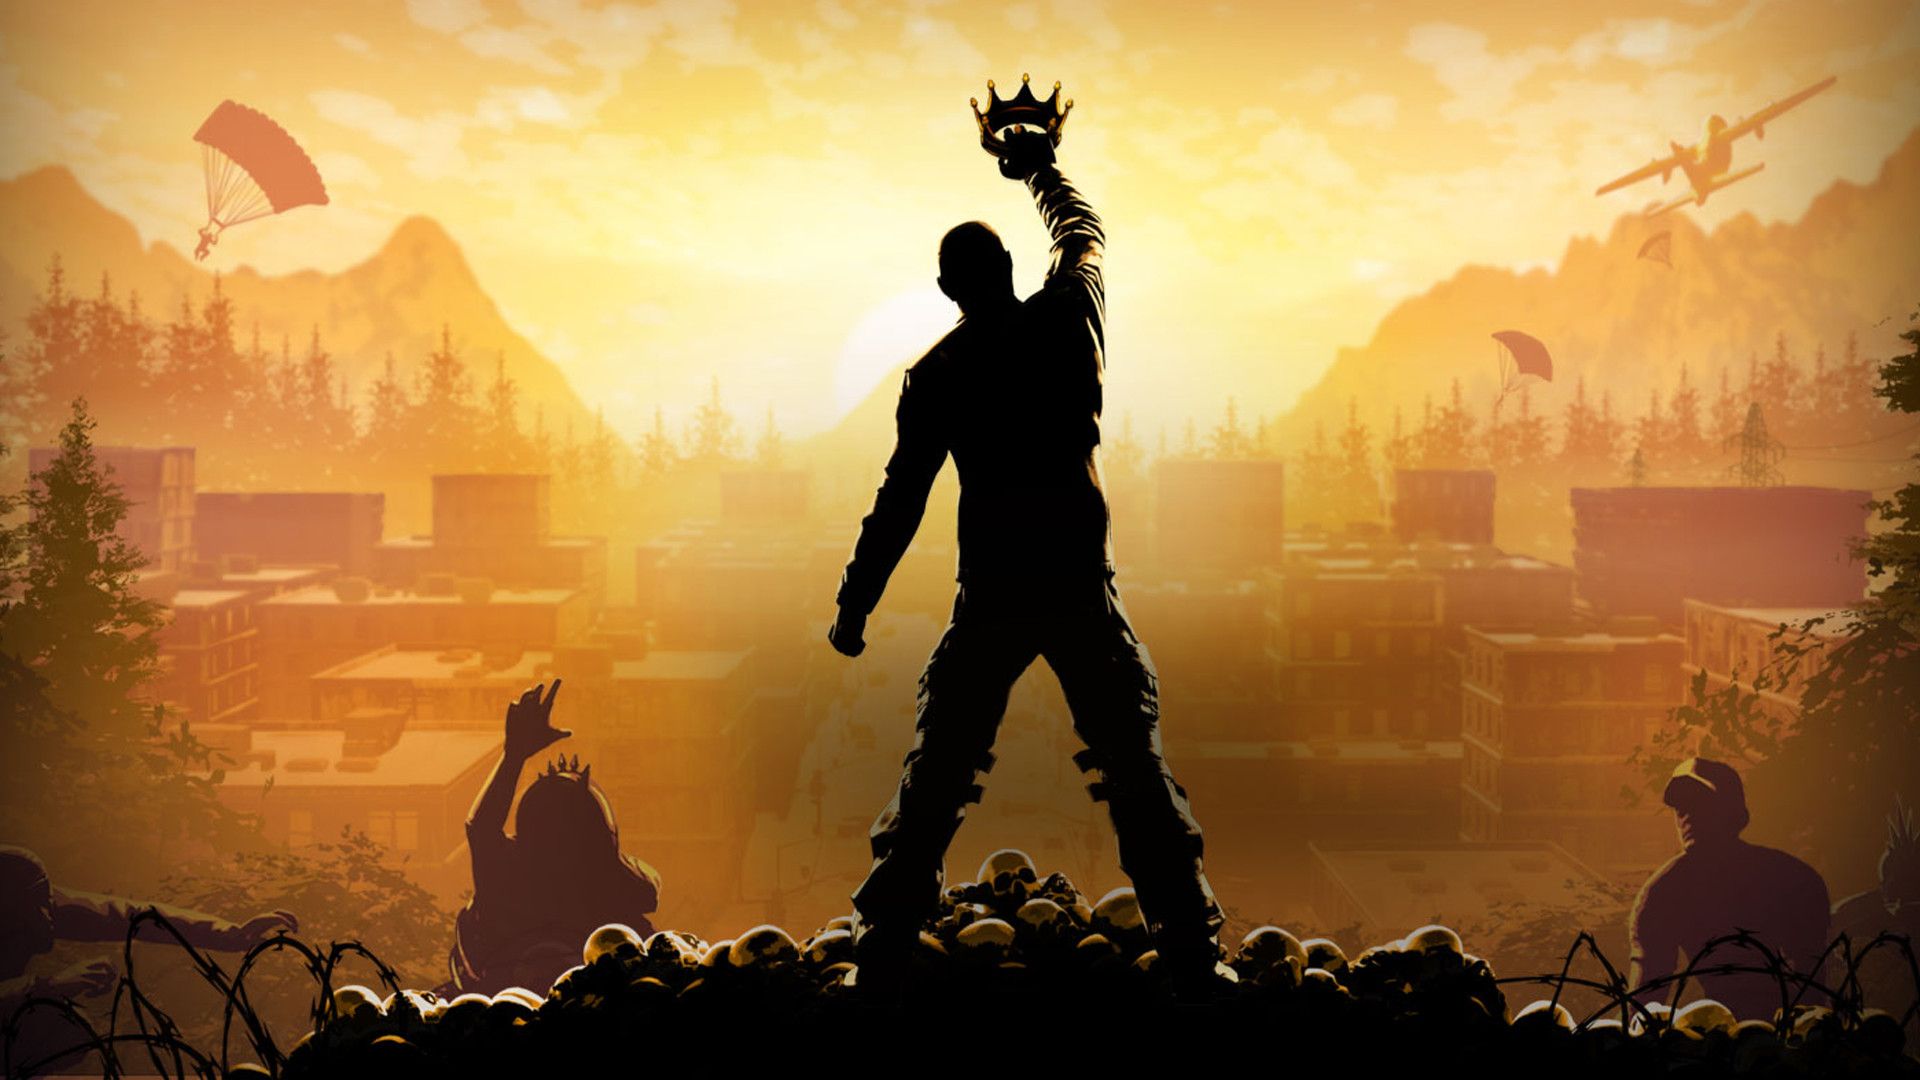 H1Z1 Pictures Wallpapers